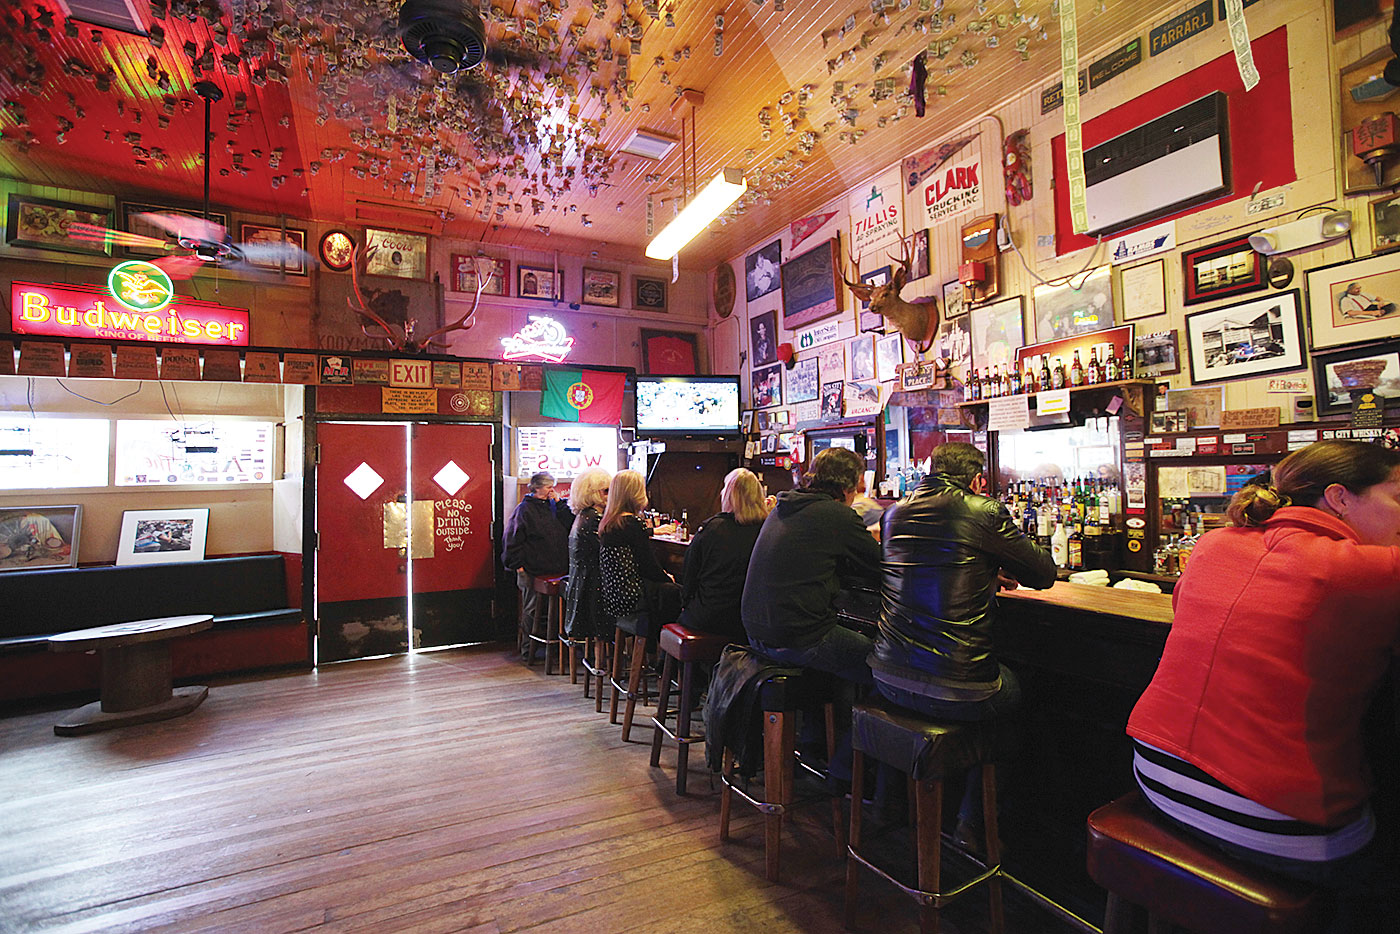 Al the Wop's is the town's only bar and restaurant that has ties to The City